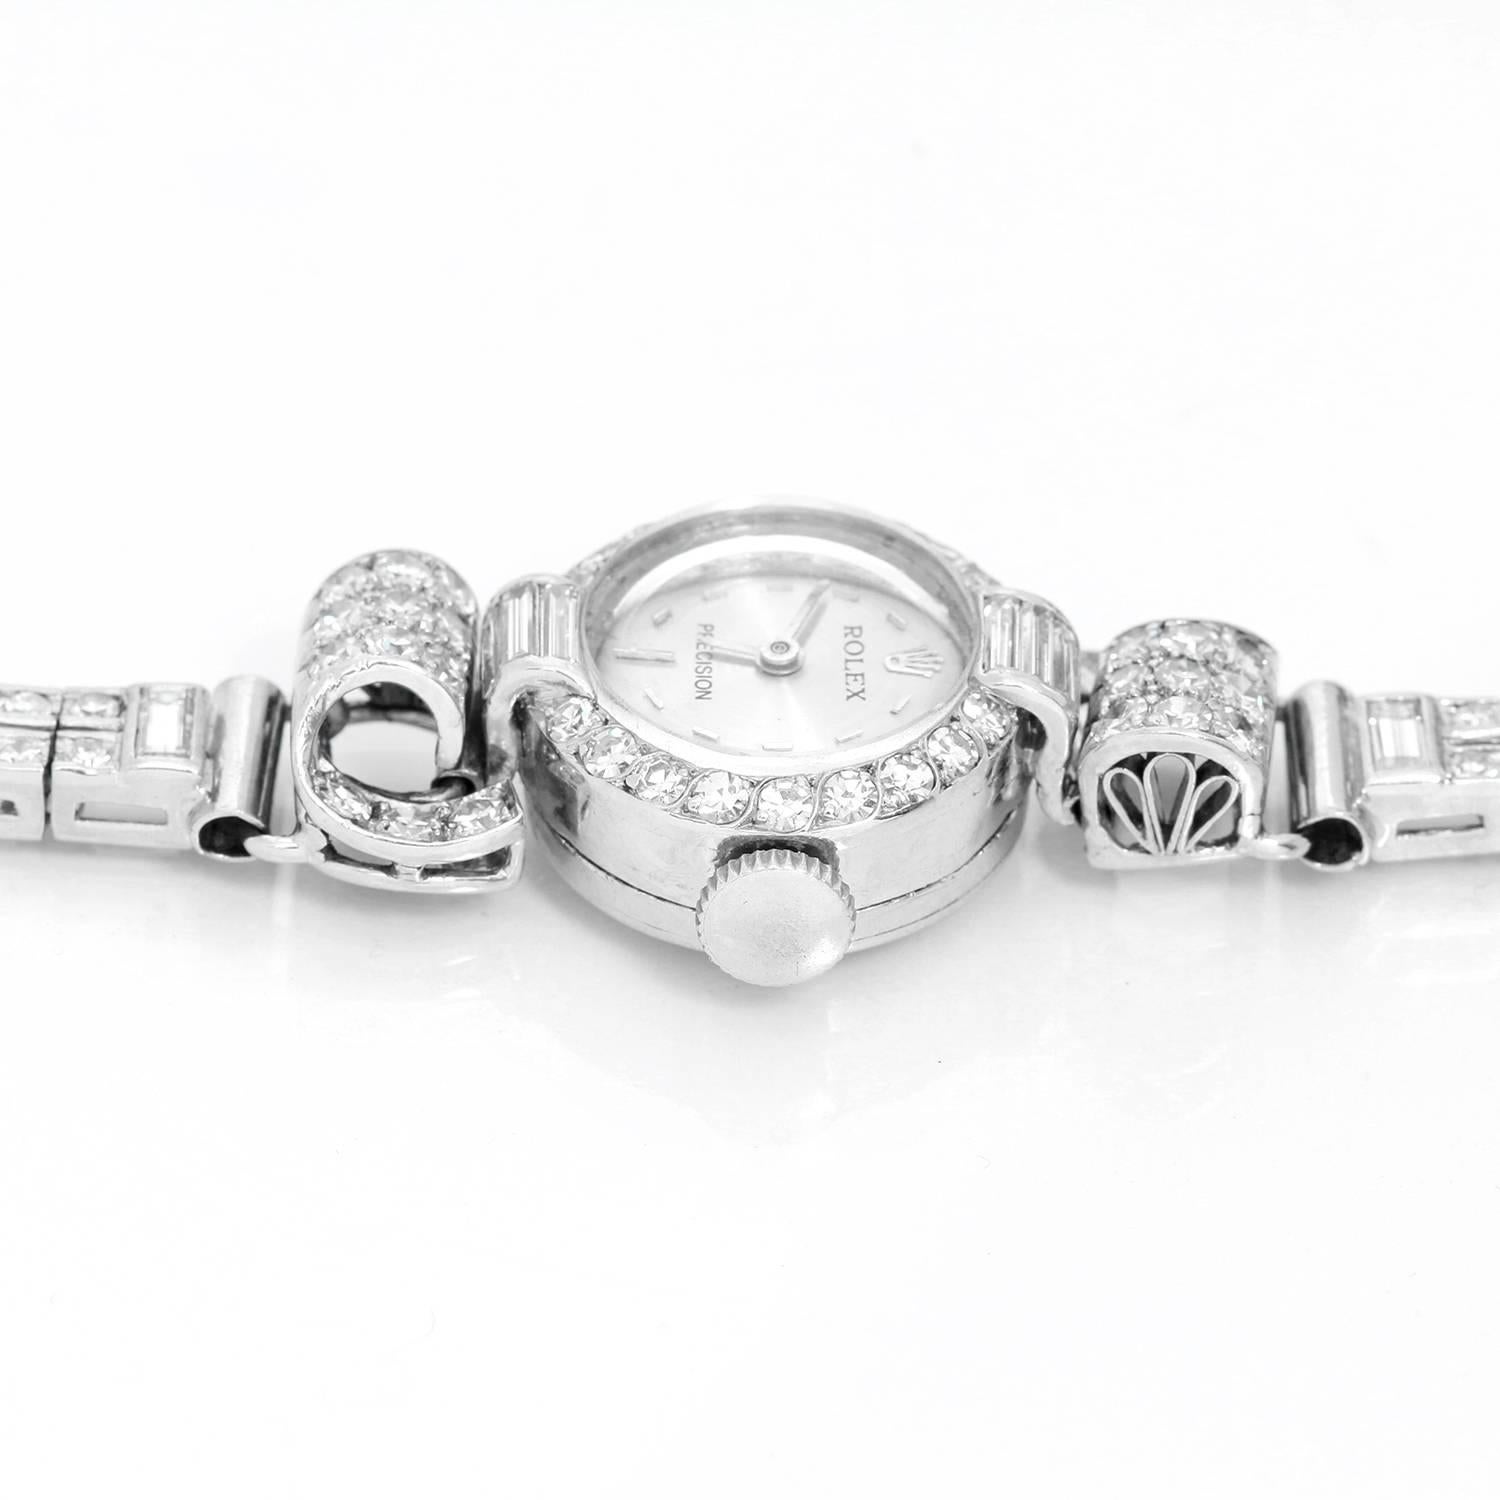 Vintage Ladies Rolex Diamond & Platinum Watch -  Mechanical sapphire crystal. Platinum case with diamond bezel(26mm). Silvered dial with stick markers. Platinum Bracelet adorned with diamonds. Pre-owned with custom box. estimated total diamond